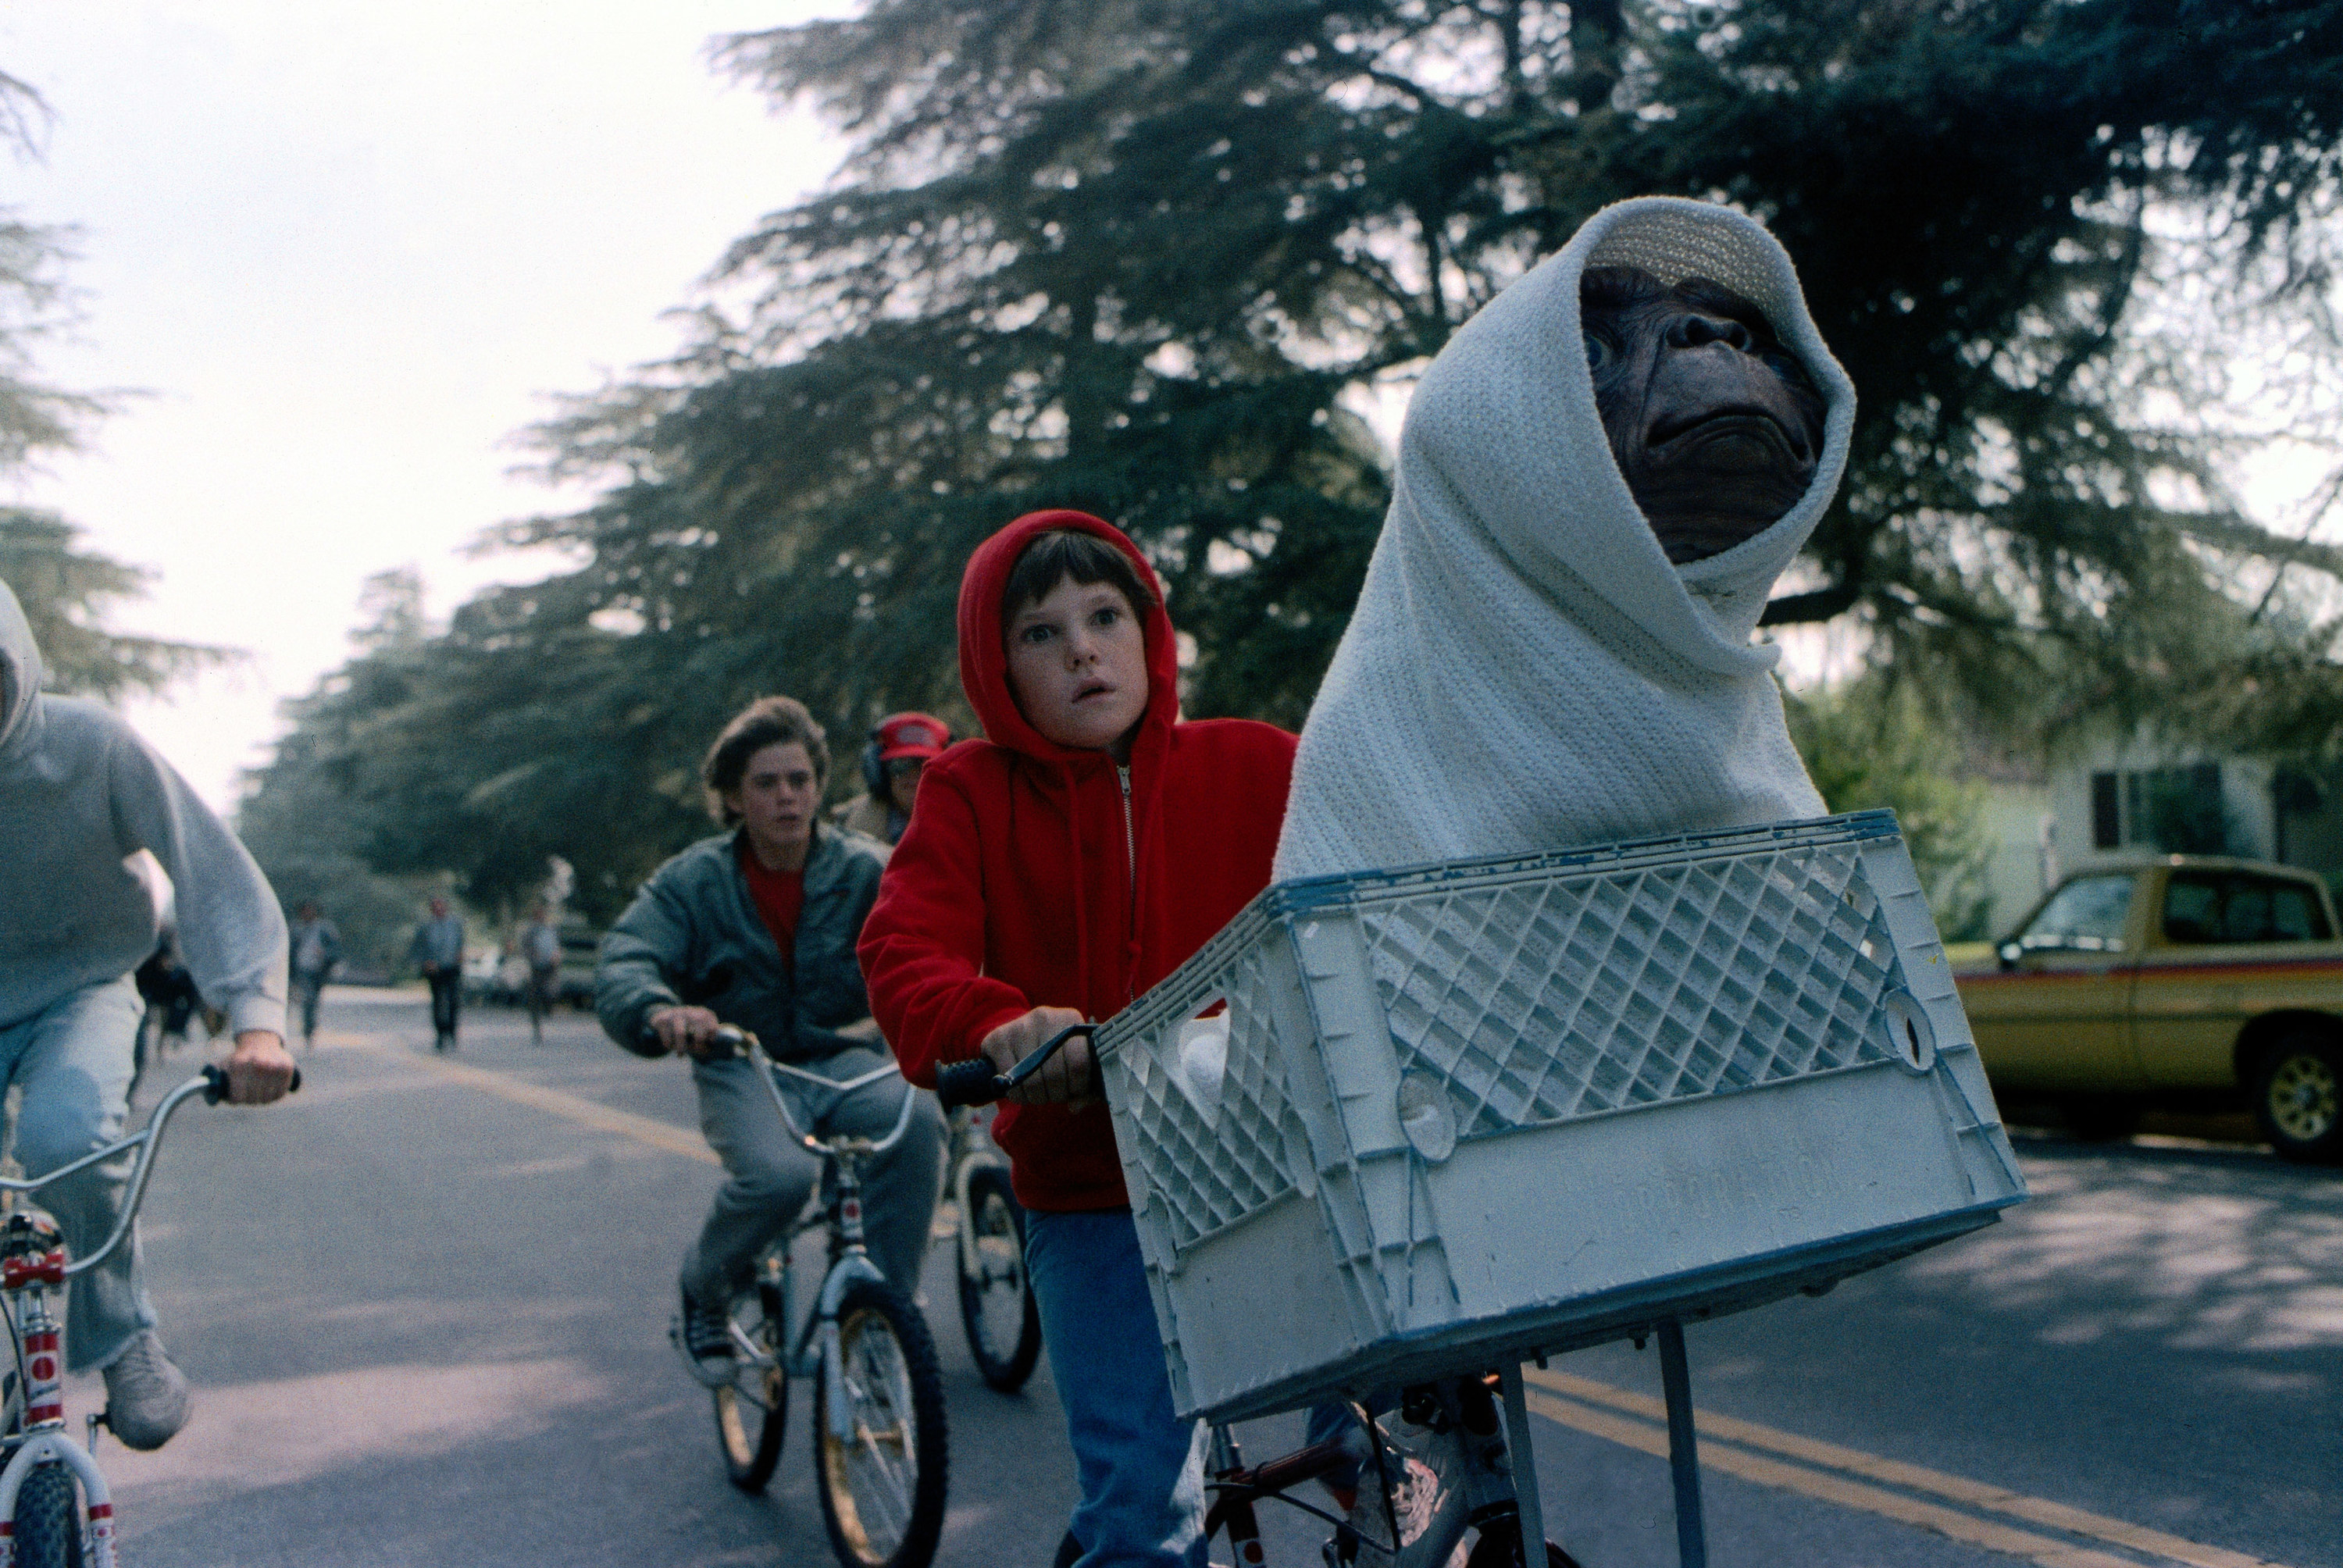 Henry Thomas rides a bike with ET in the basket